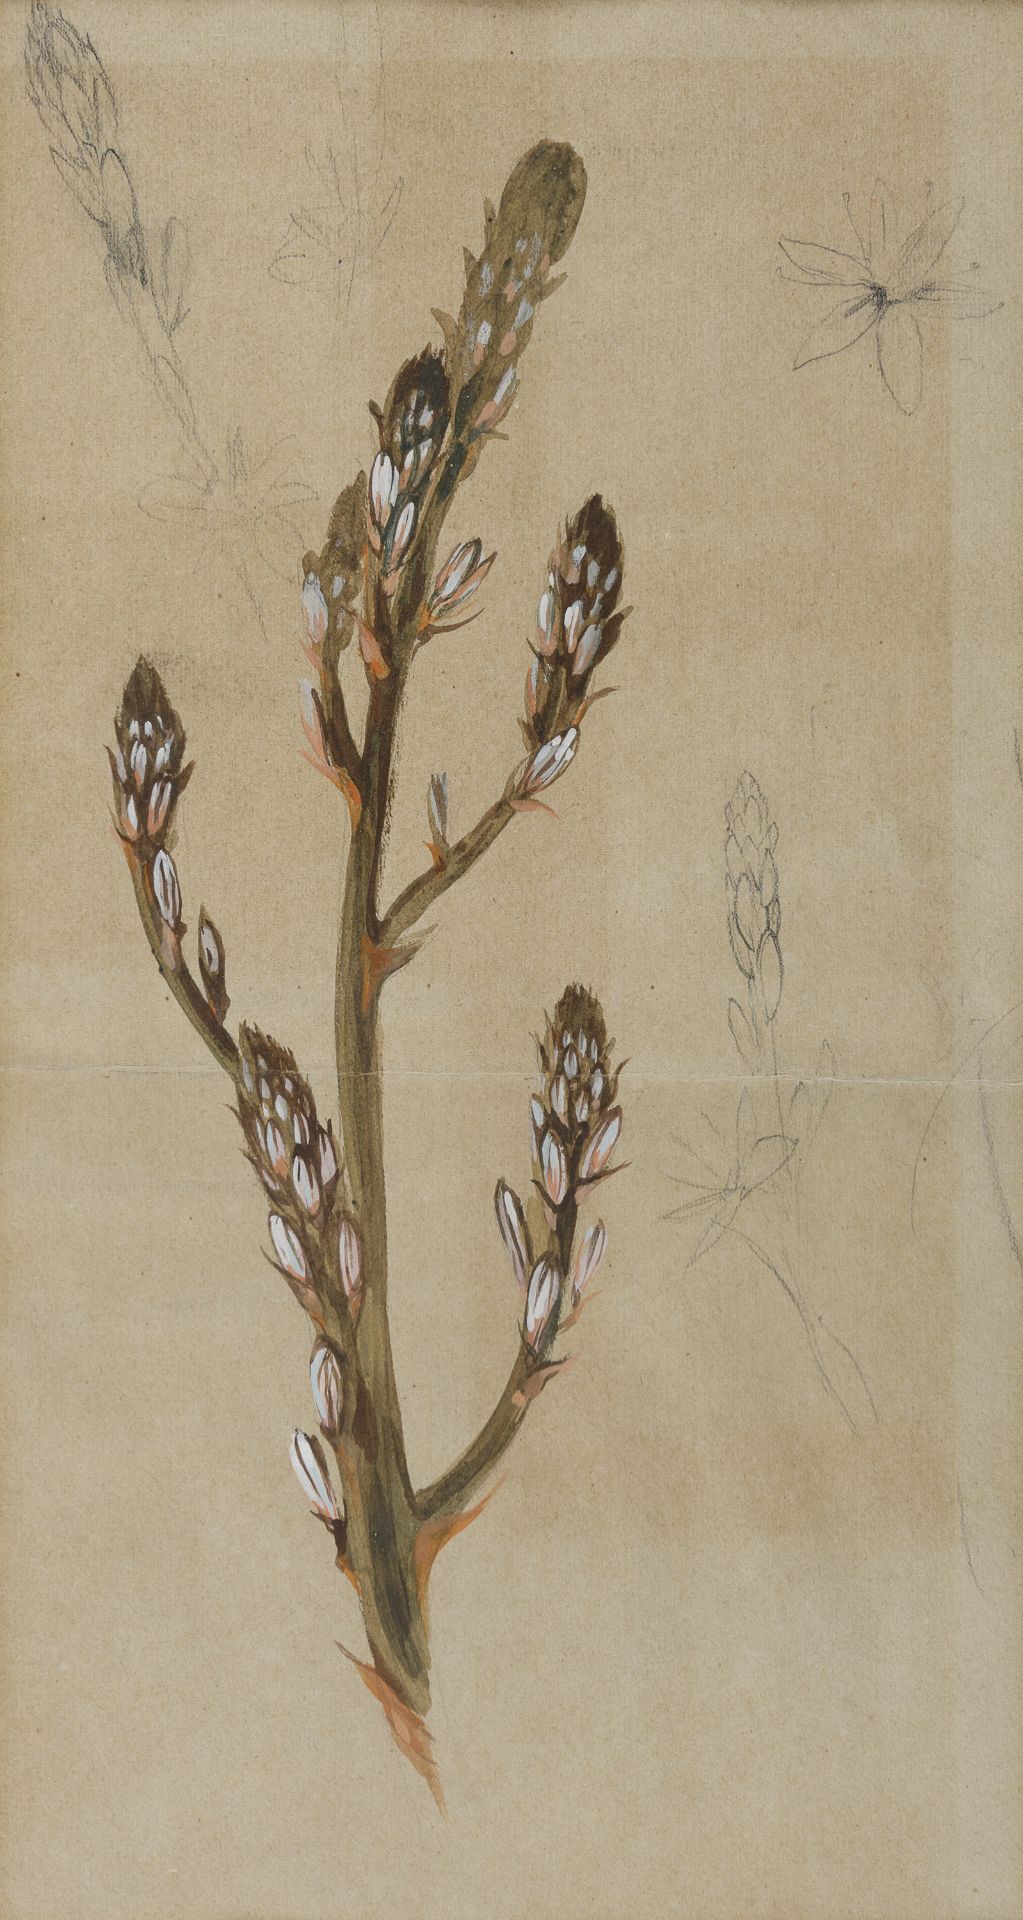 PENCIL WATERCOLOUR AND TEMPERA STUDY FOR EAR OF ASPHODEL BY DUILIO CAMBELLOTTI 1910/20